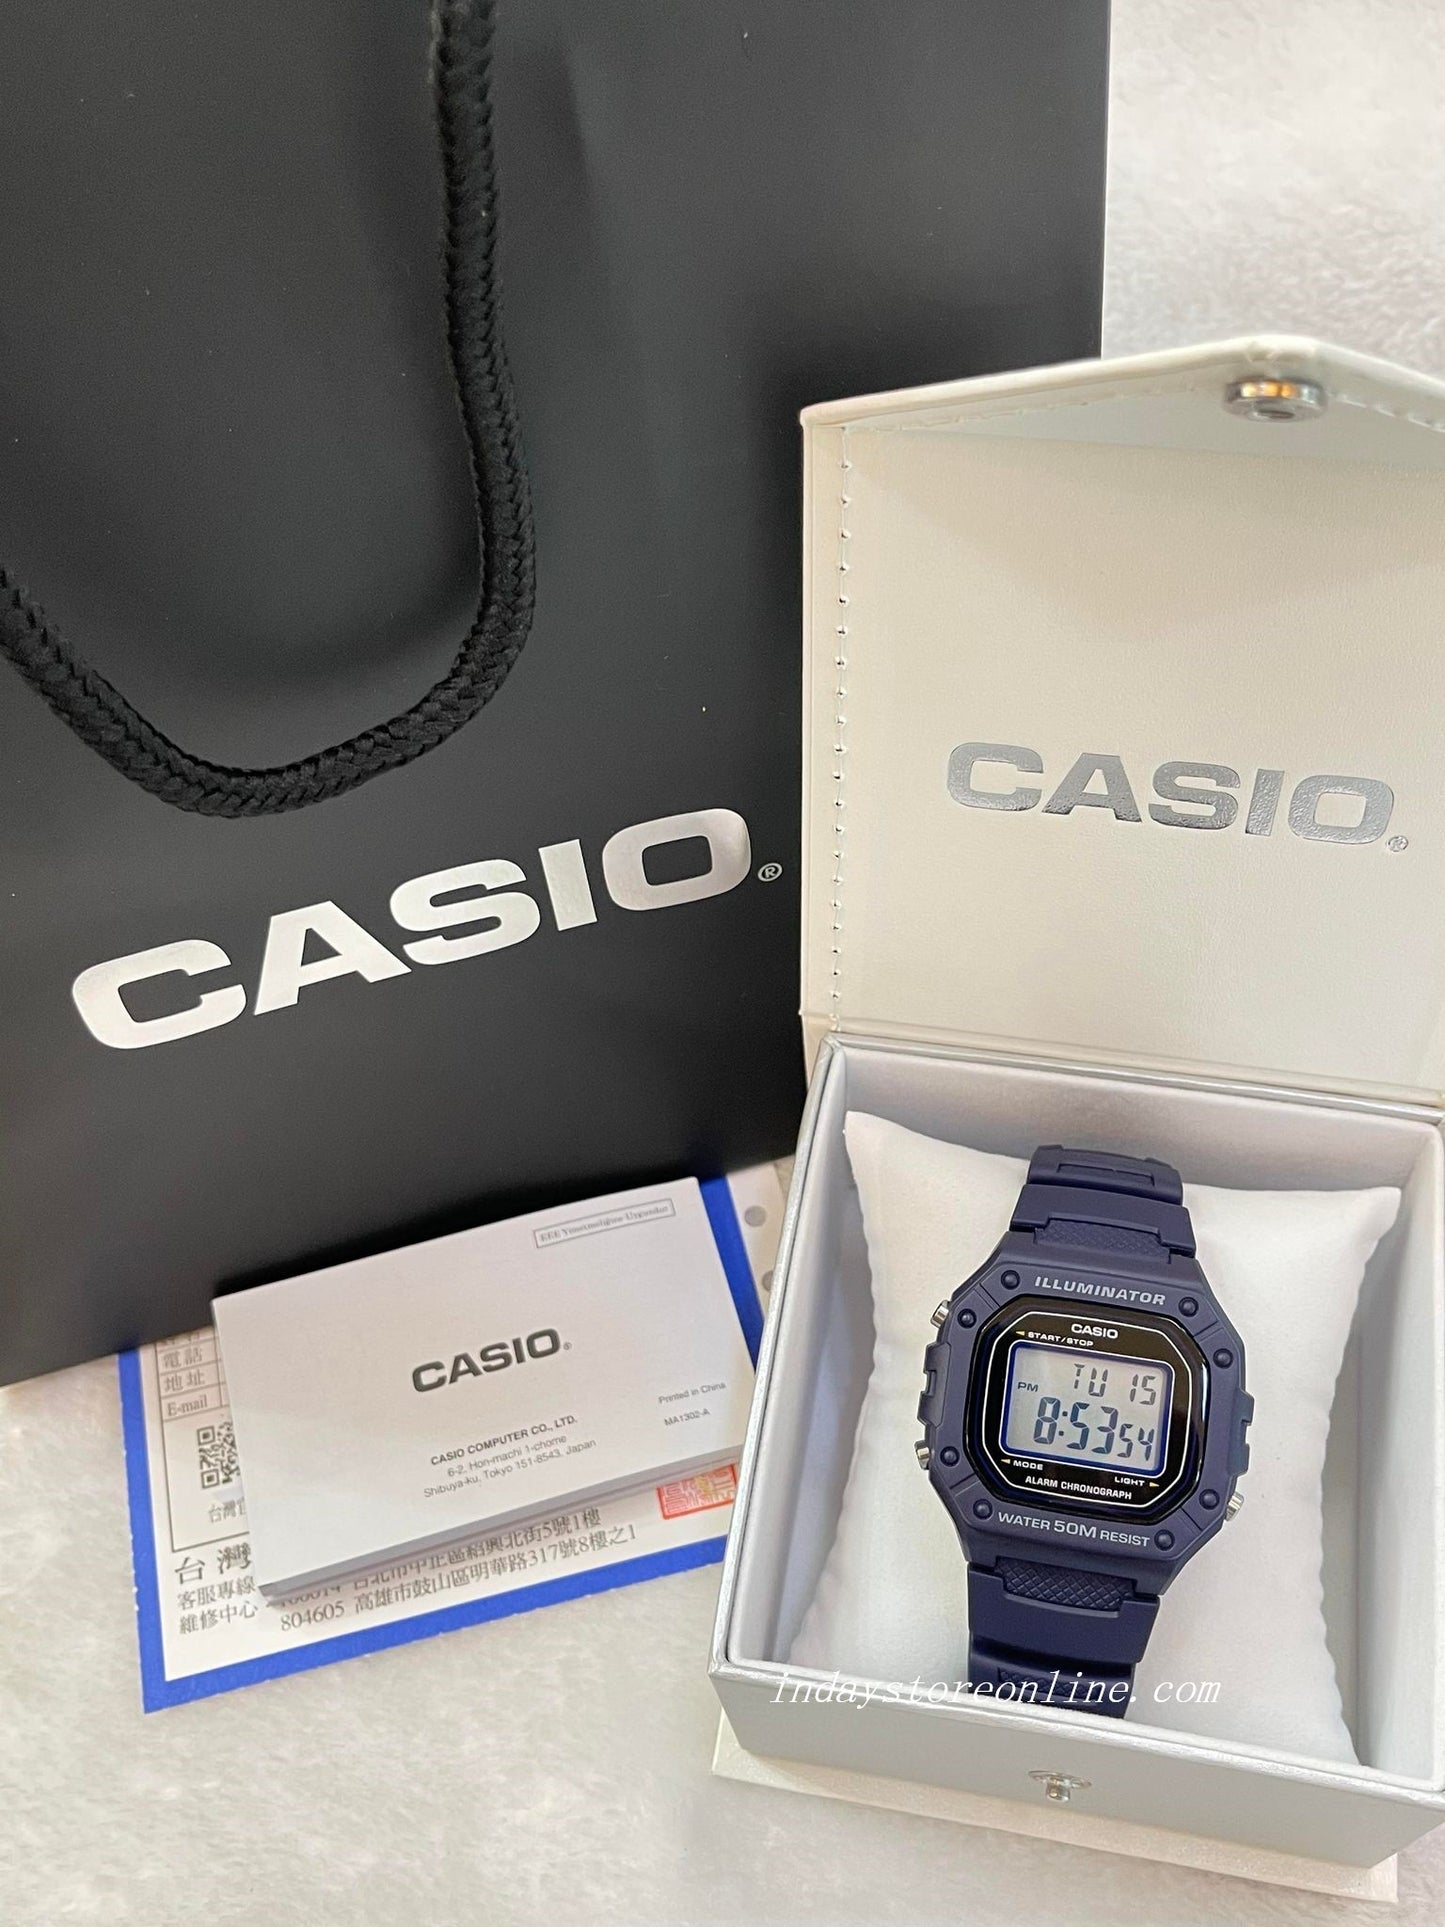 Casio Digital Men's Watch W-218H-2A Digital Resin Band Resin Glass Battery Life: 7 Years